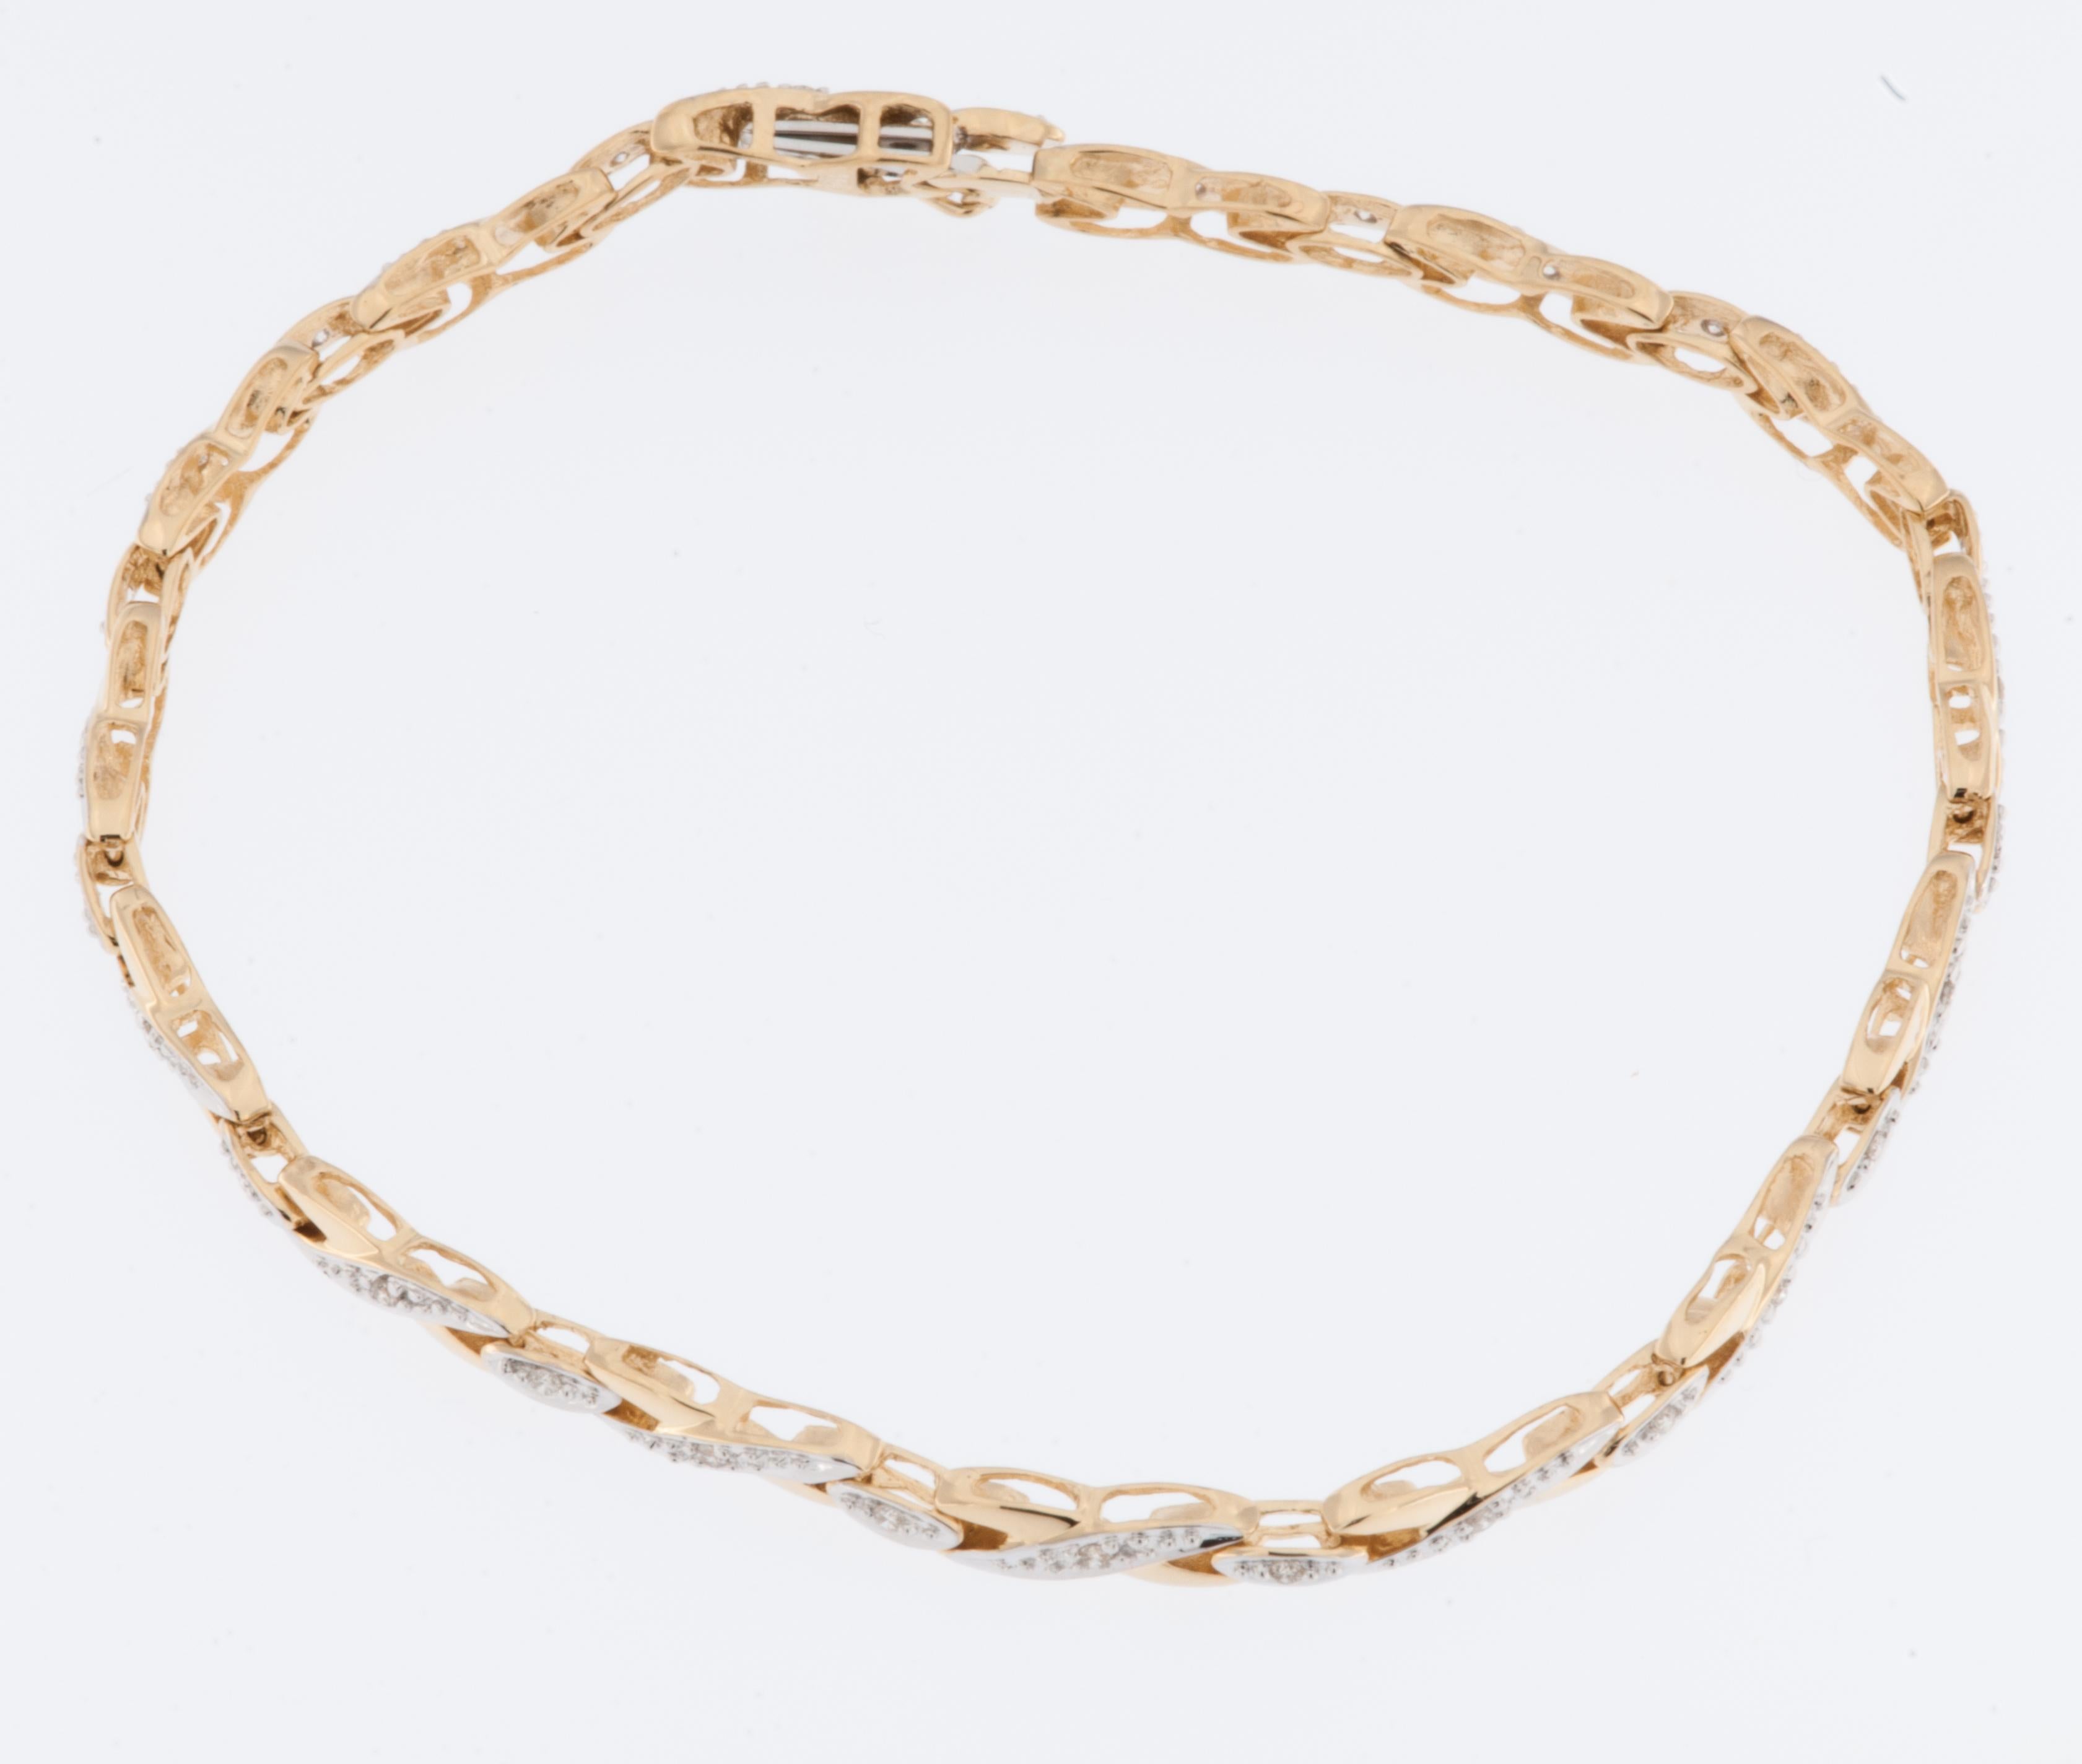 The vintage 18kt Yellow and White Gold French Bracelet with Diamonds is a beautiful piece of jewelry that combines yellow and white gold with the added elegance of diamonds. 

The bracelet is made of 18-karat gold, which signifies a high level of